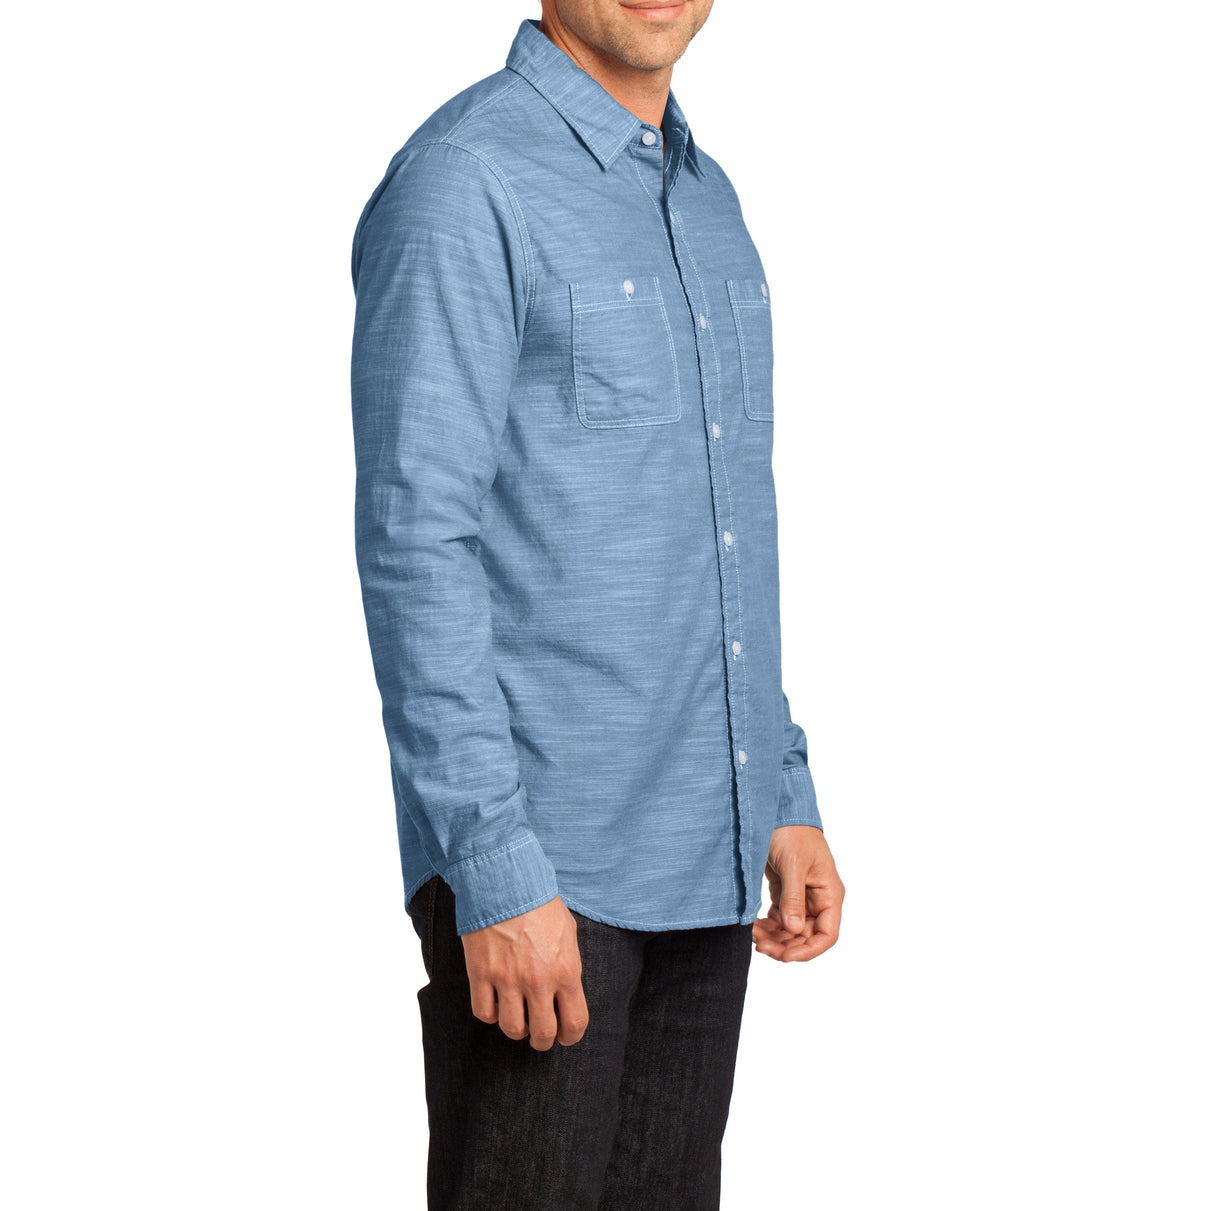 Mens Long Sleeve Washed Woven Shirt - Light Blue - Side